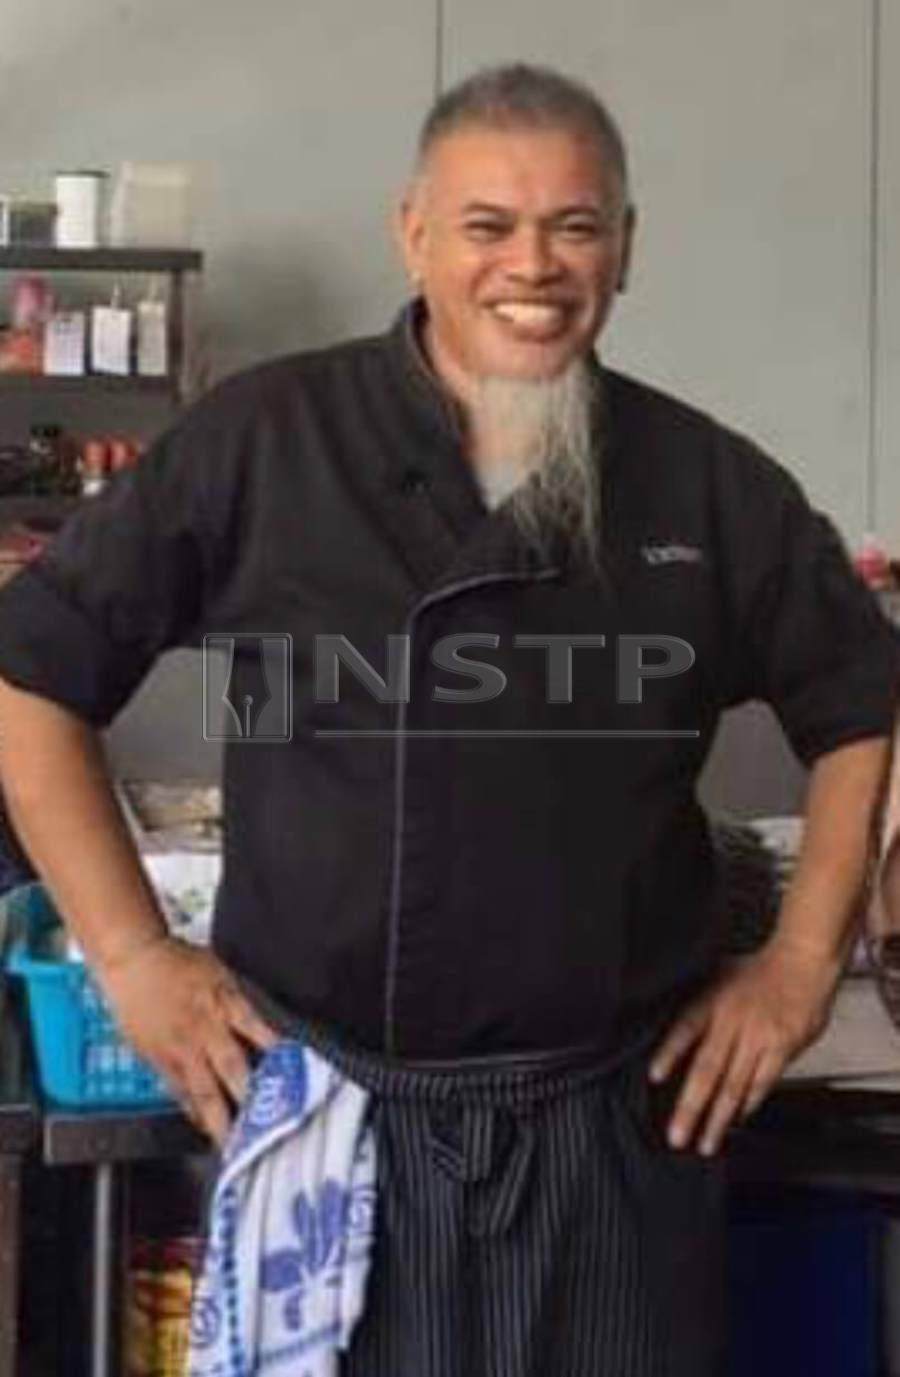 News, however, began making rounds in the social media today that Syed Zaidi, fondly known as “Chef Boe” or “Abang Boe” among patrons of the restaurant, had passed away at dawn. Pic by NSTP/ courtesy of NSTP readers